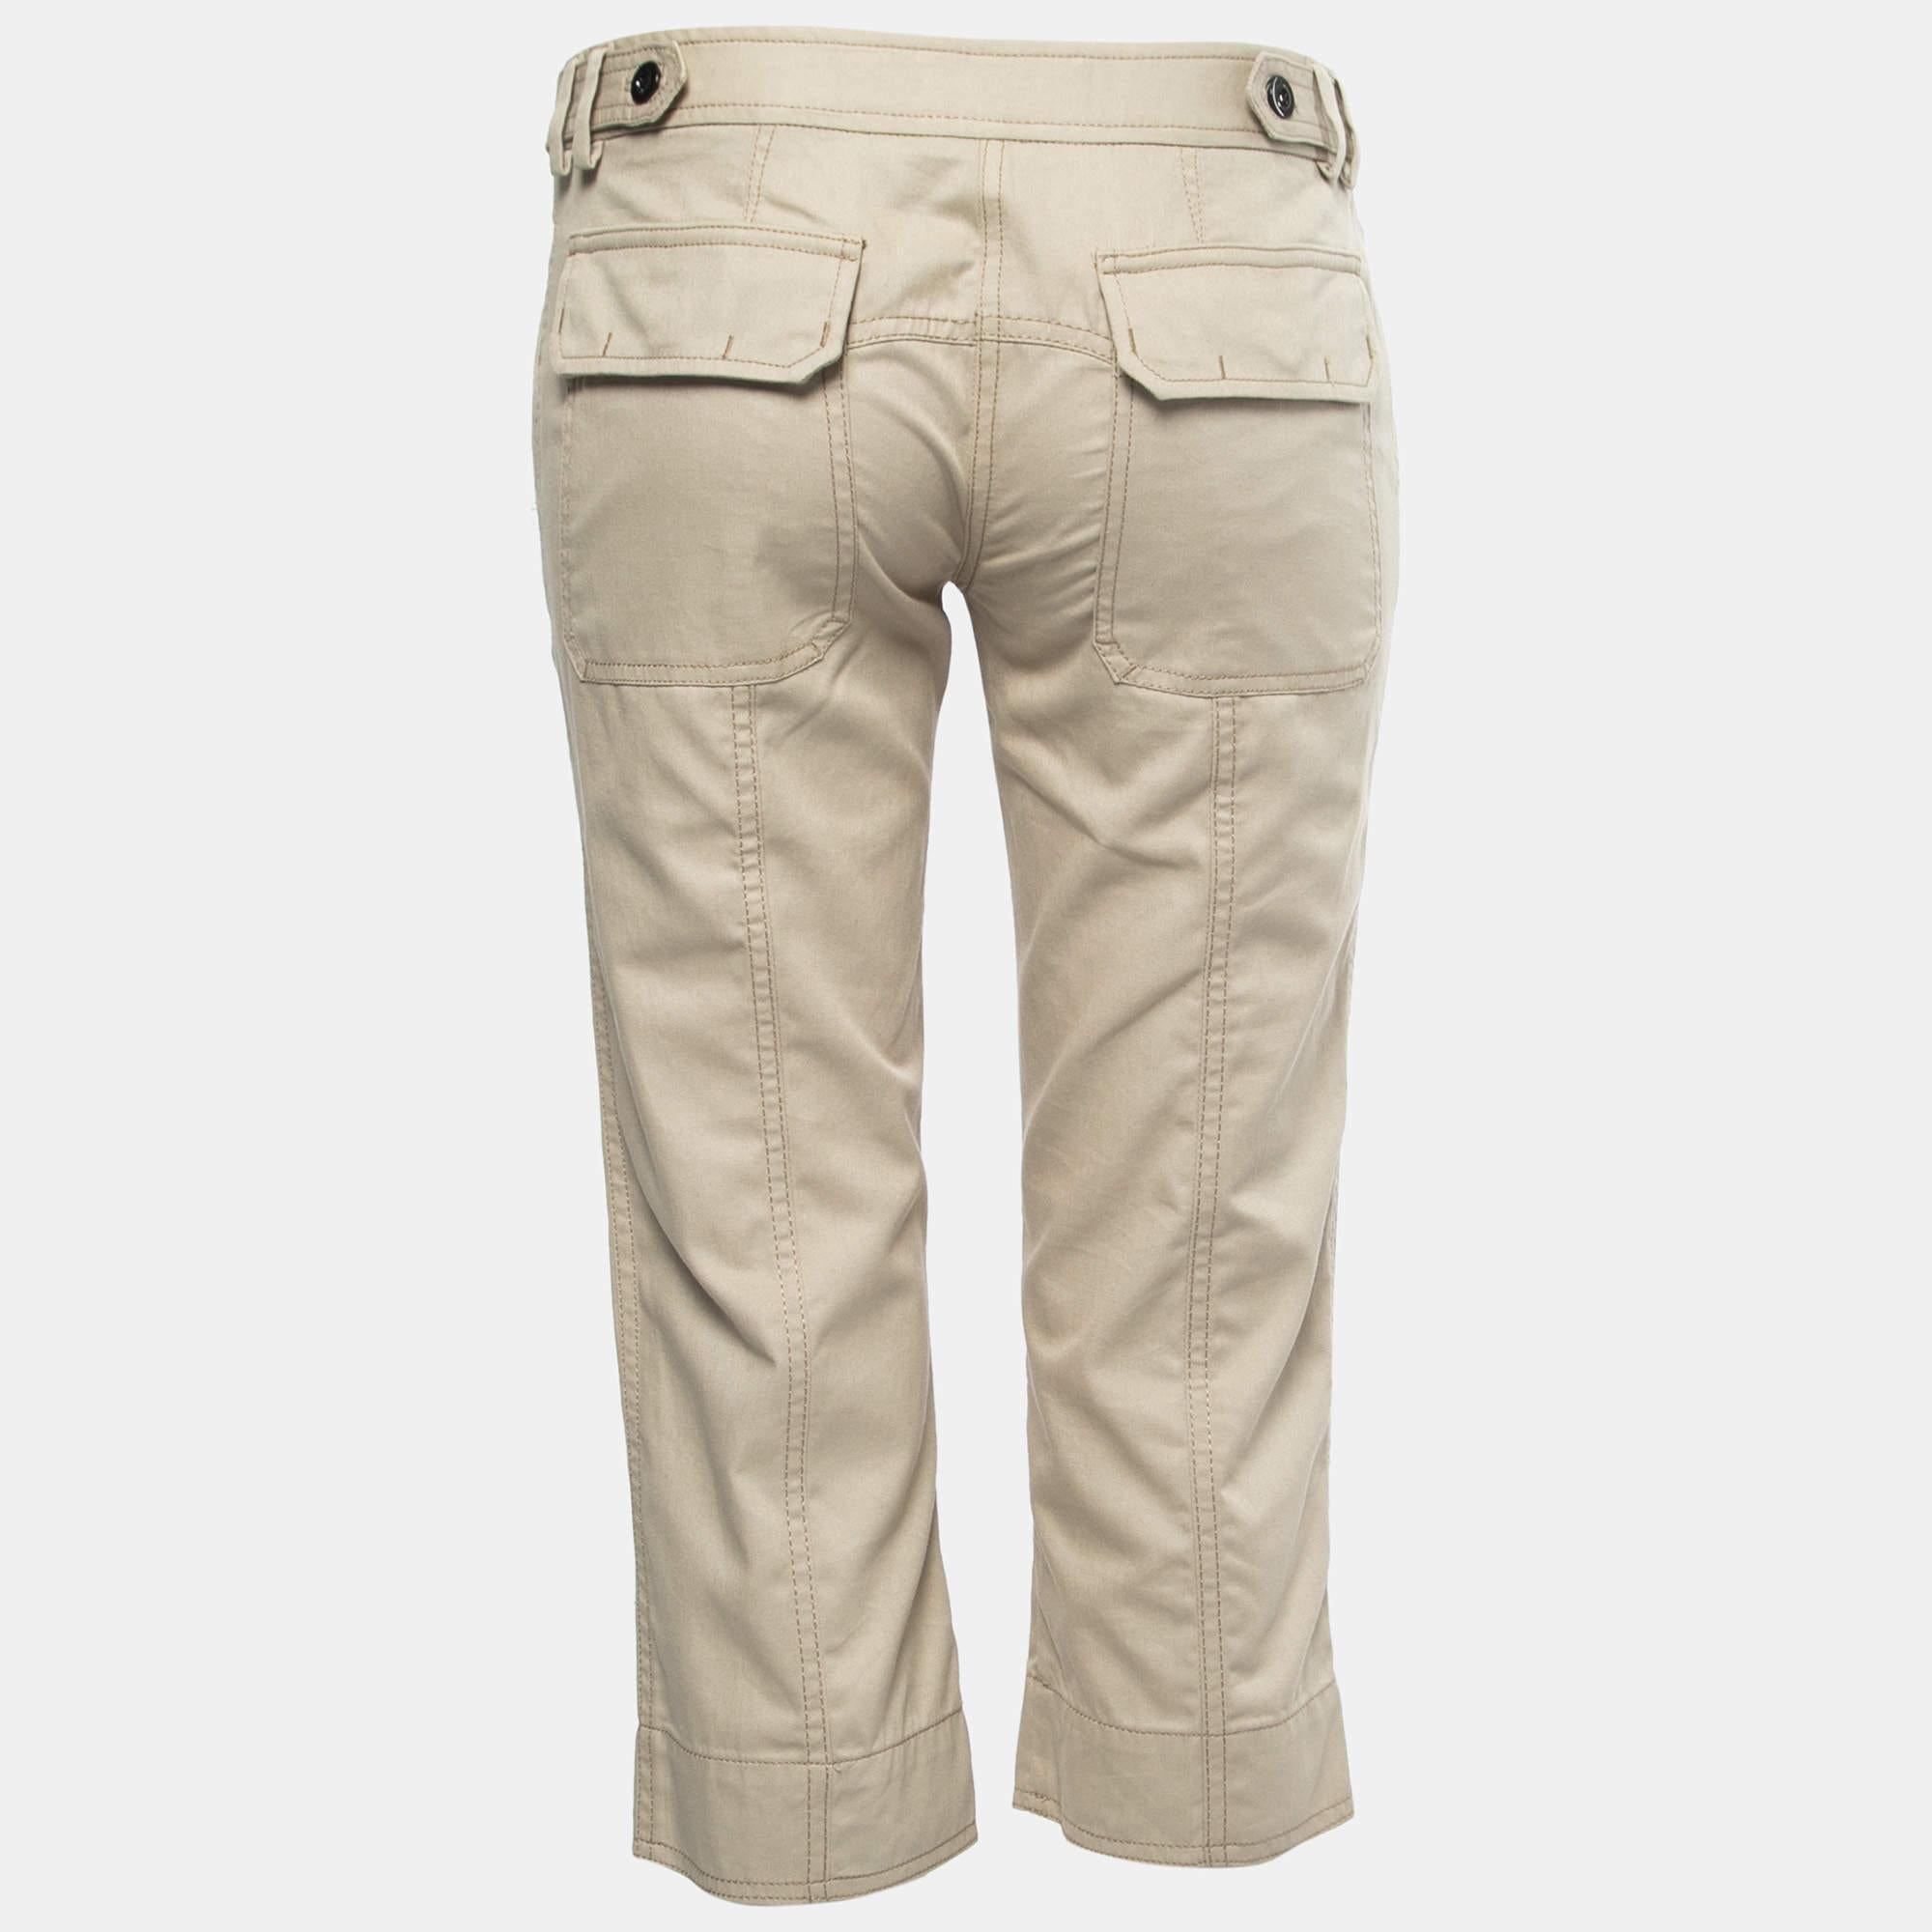 Made from high-quality cotton fabric, these capri pants feature a flattering beige hue, a classic capri length, and a tailored fit. Perfect for casual or semi-formal occasions, they exude effortless elegance.

Includes: Brand tag, Extra Button